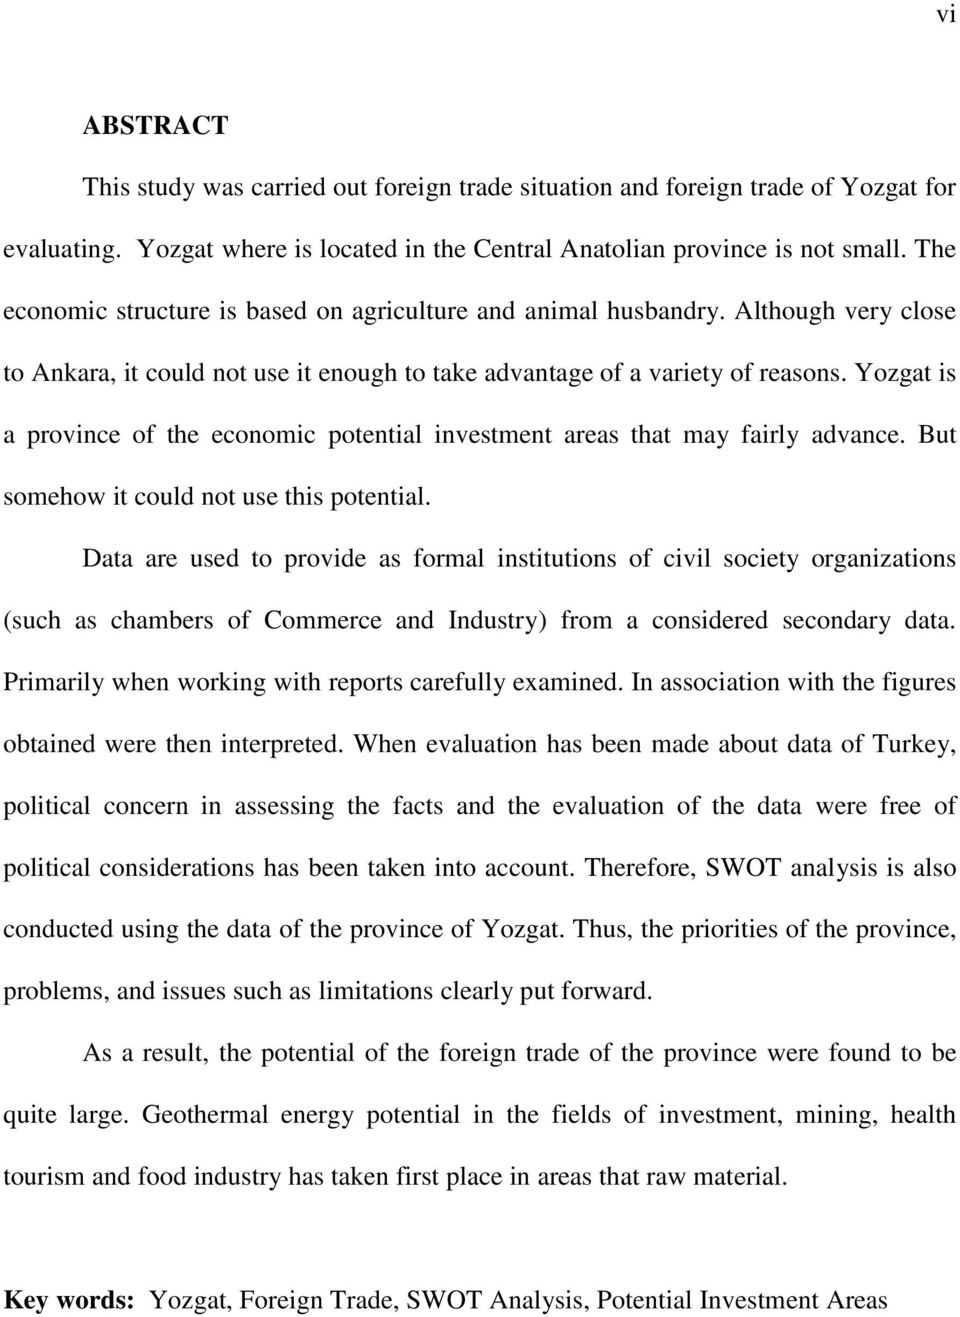 Yozgat is a province of the economic potential investment areas that may fairly advance. But somehow it could not use this potential.